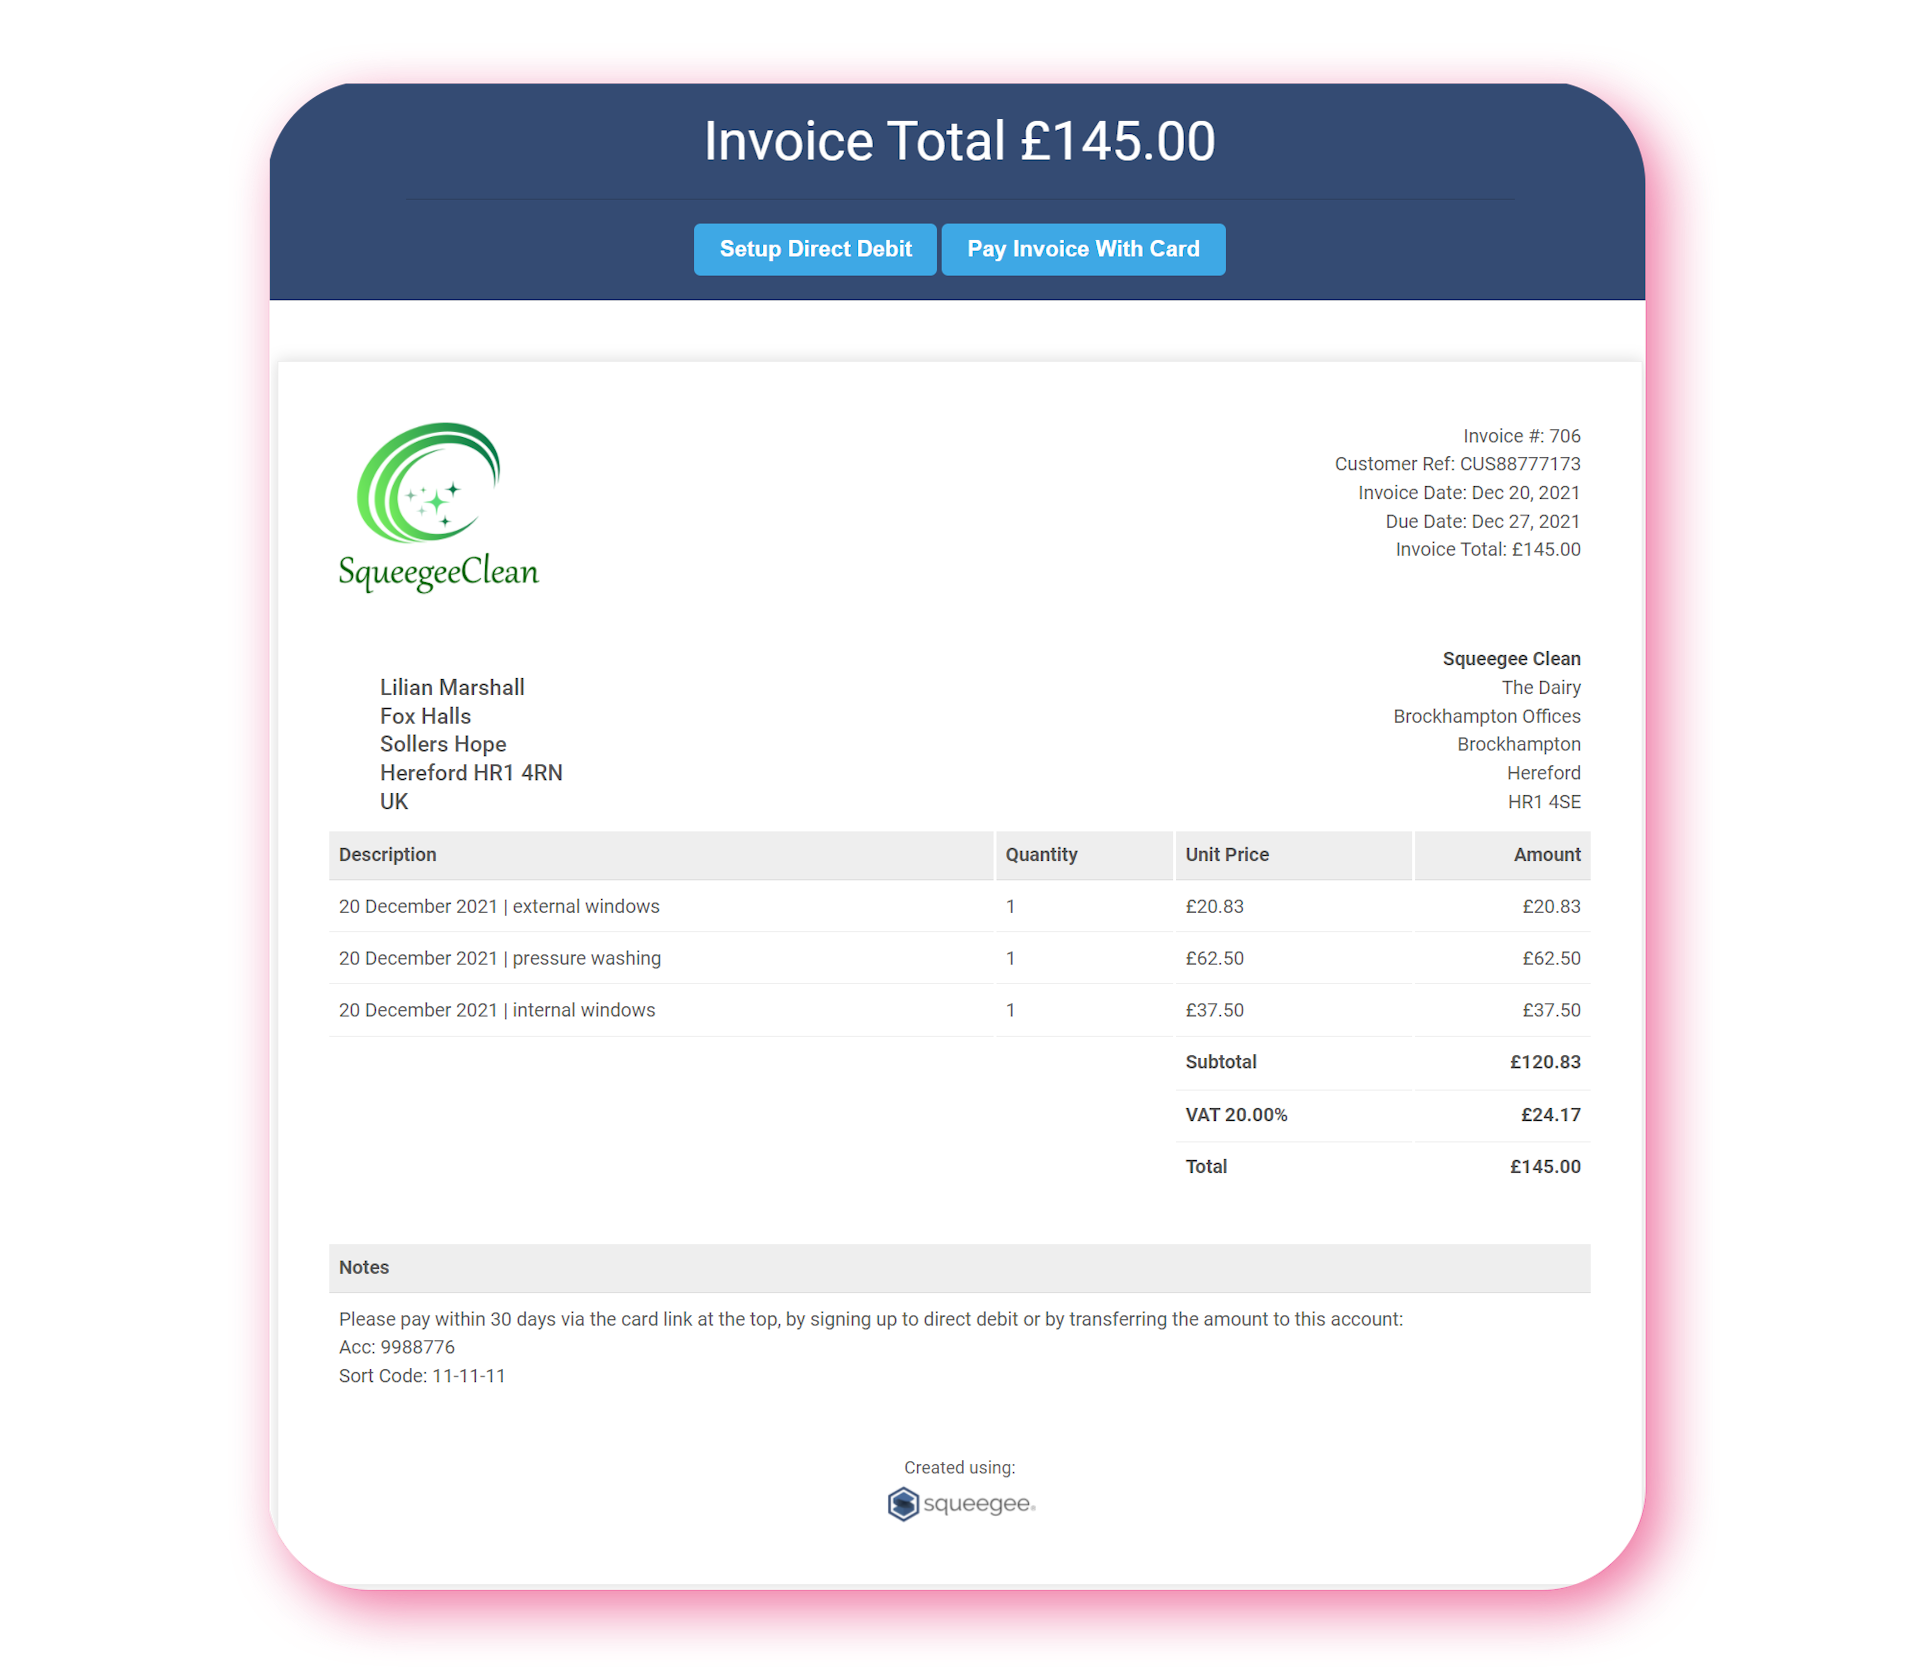 Invoice as the customer sees it on their device